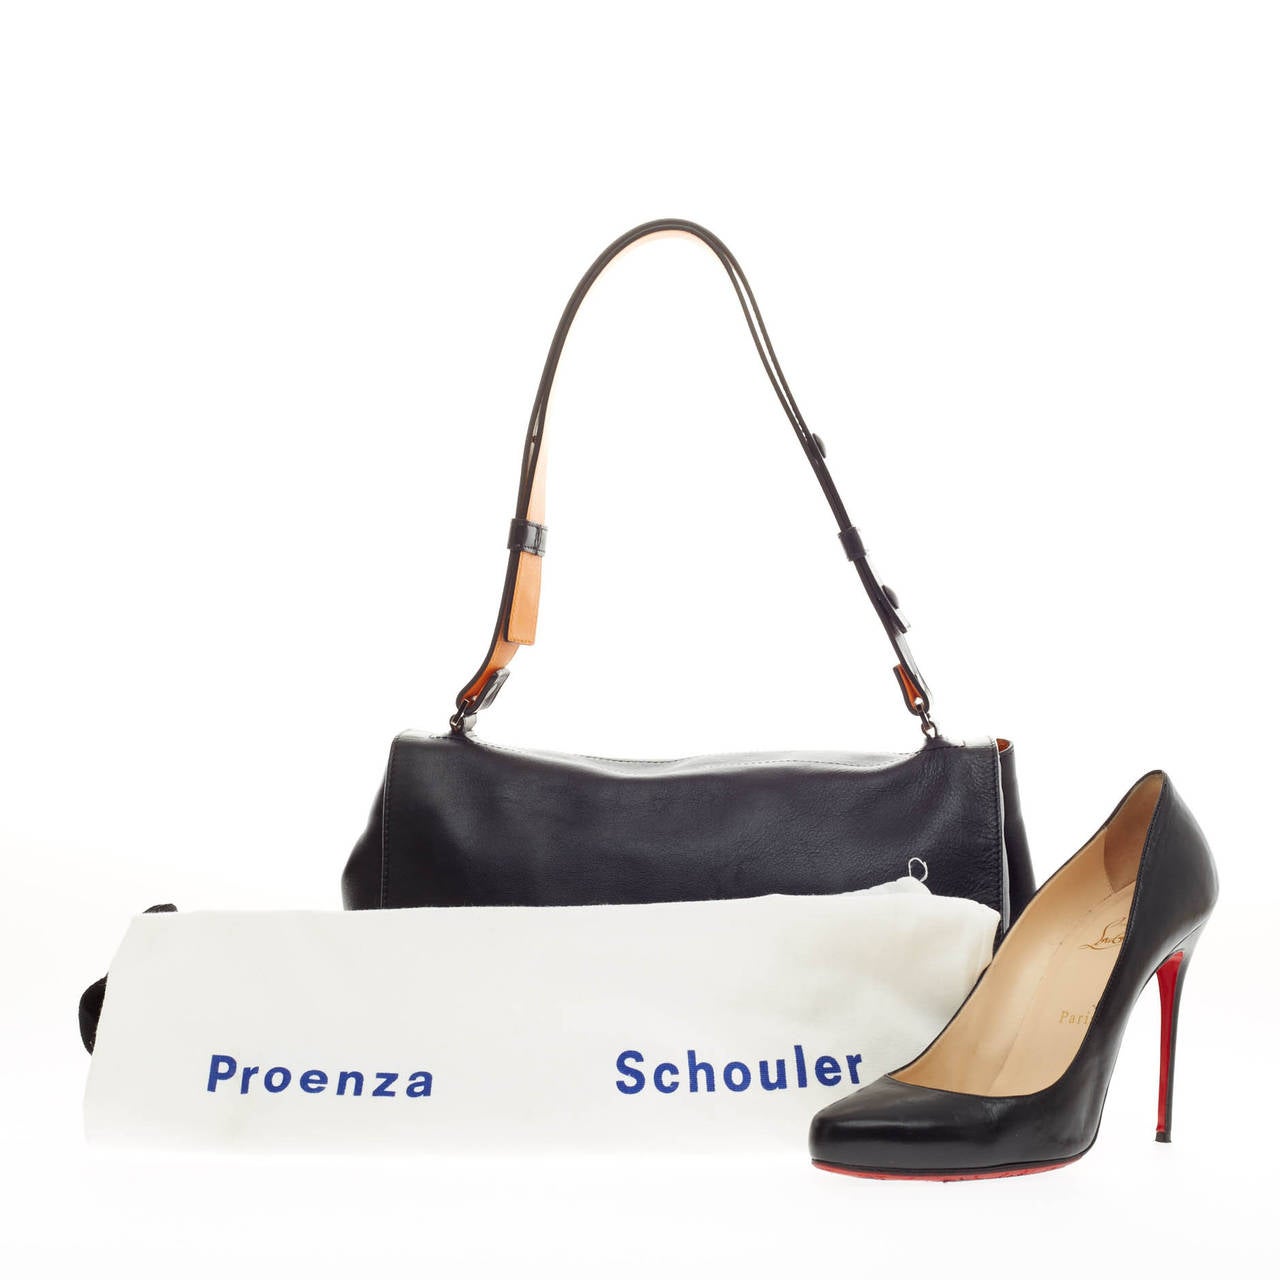 This authentic Proenza Schouler Courier Smooth Leather Medium is a minimalistic stylish bag loved by fashionistas. Crafted in supple black leather, this bag features a fold-over top with exterior back pocket, silver side snap studs and adjustable